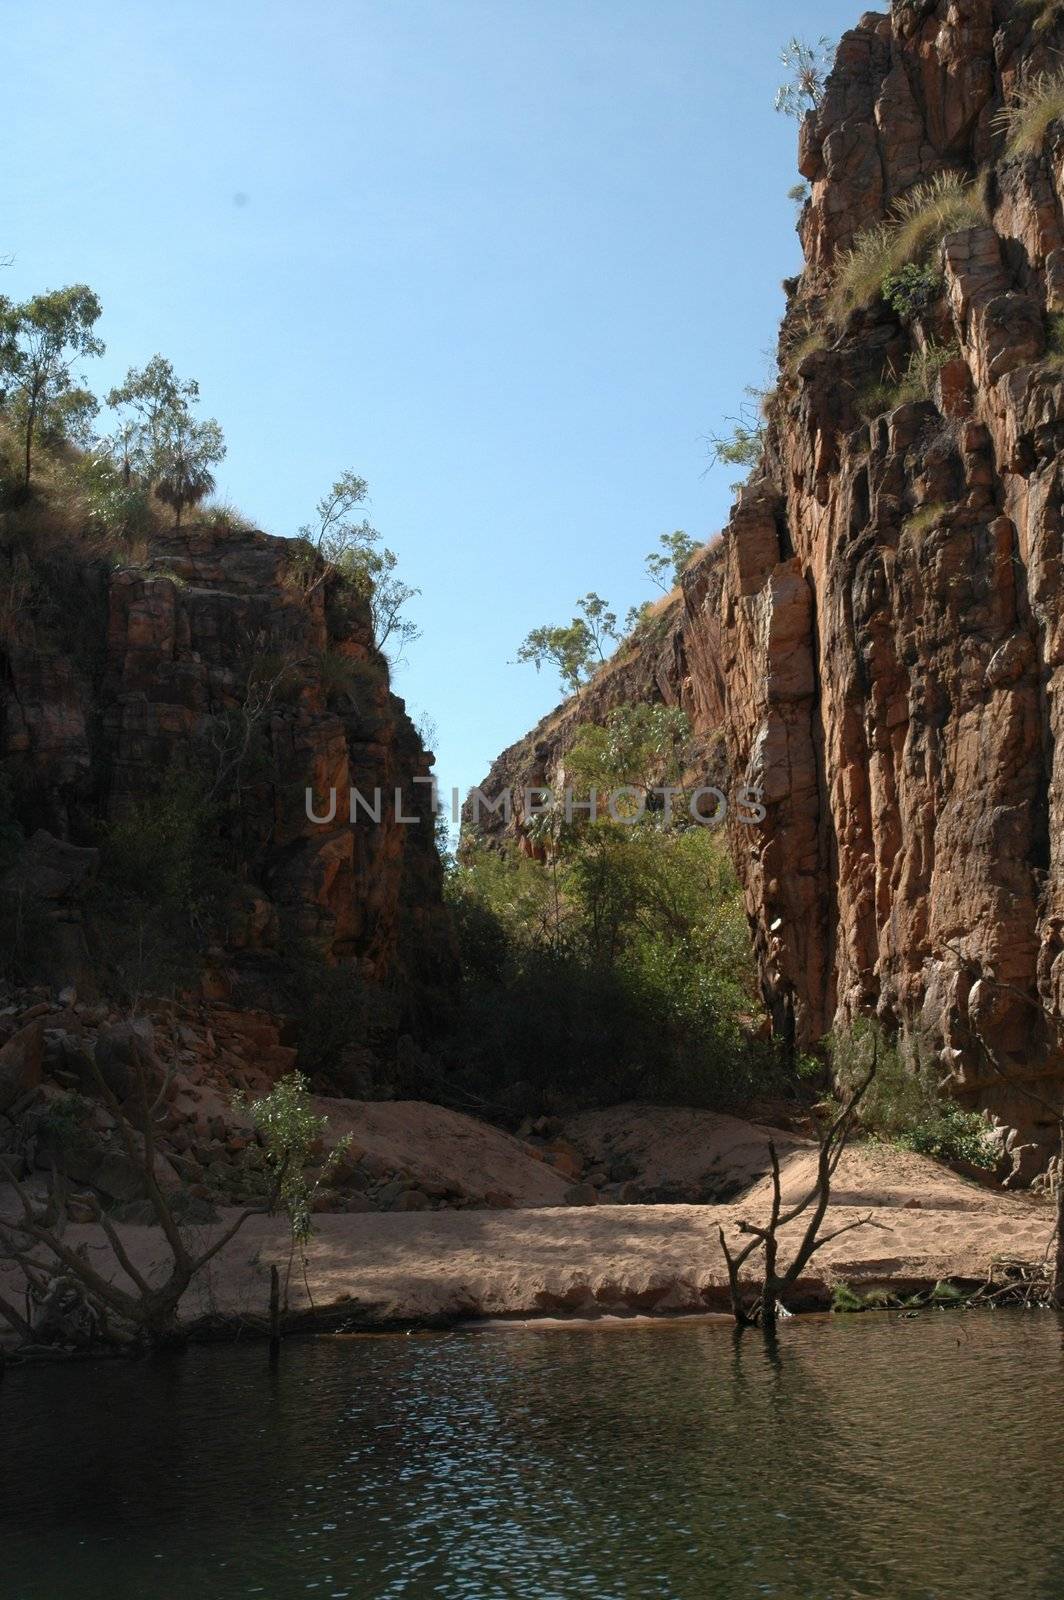 One of the many beautiful cliff faces in Kakadu National Park